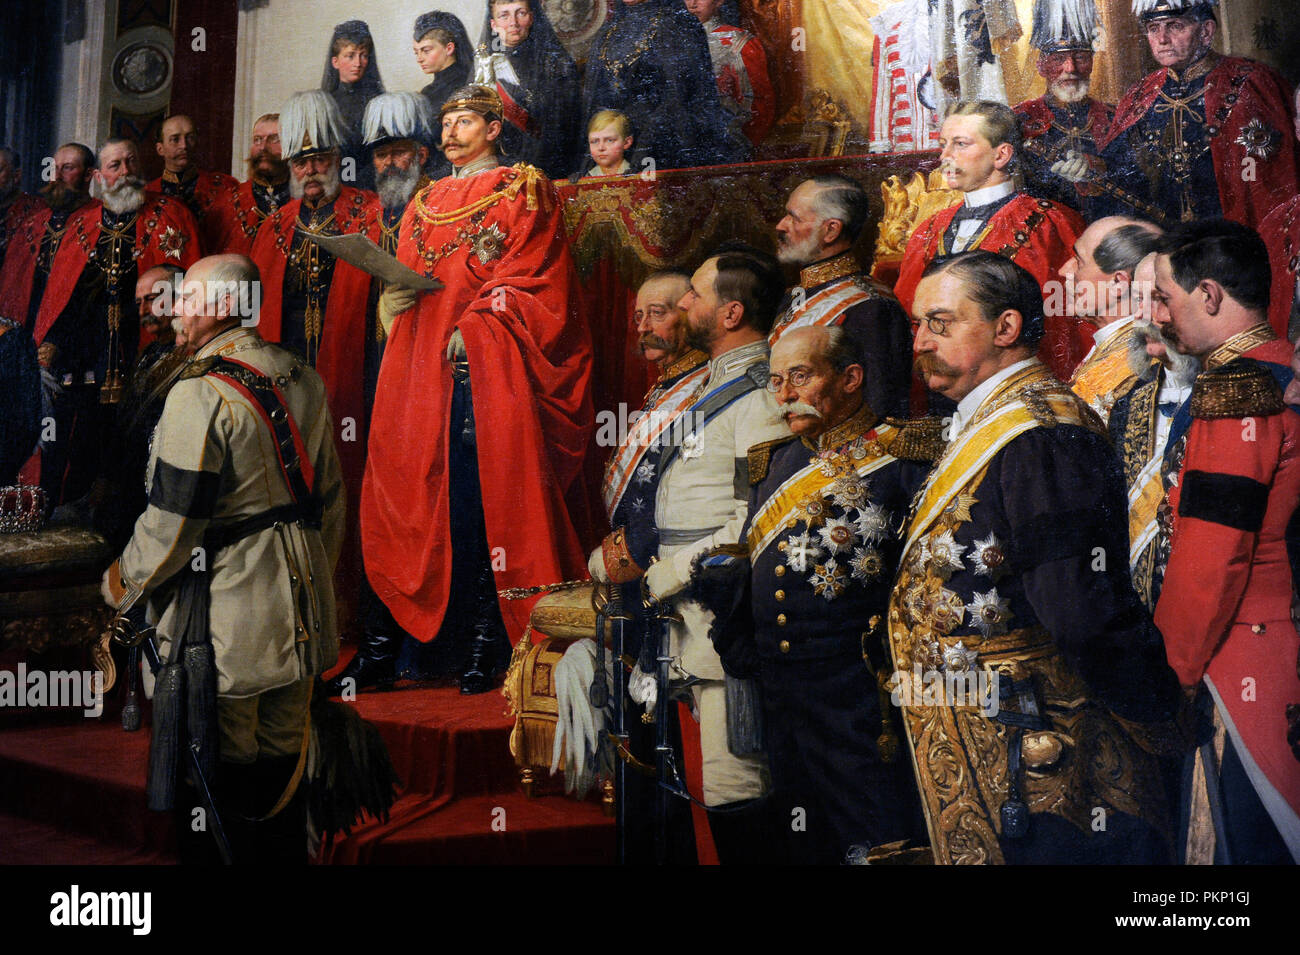 The Opening of the German Reichstag in the White Hall of the Berlin Schloss by Kaiser Wilhelm II on June 25, 1888. Detail. Painting finished in 1893 by Anton Von Werner (1843-1915). German Historical Museum, Berlin. Germany. Stock Photo